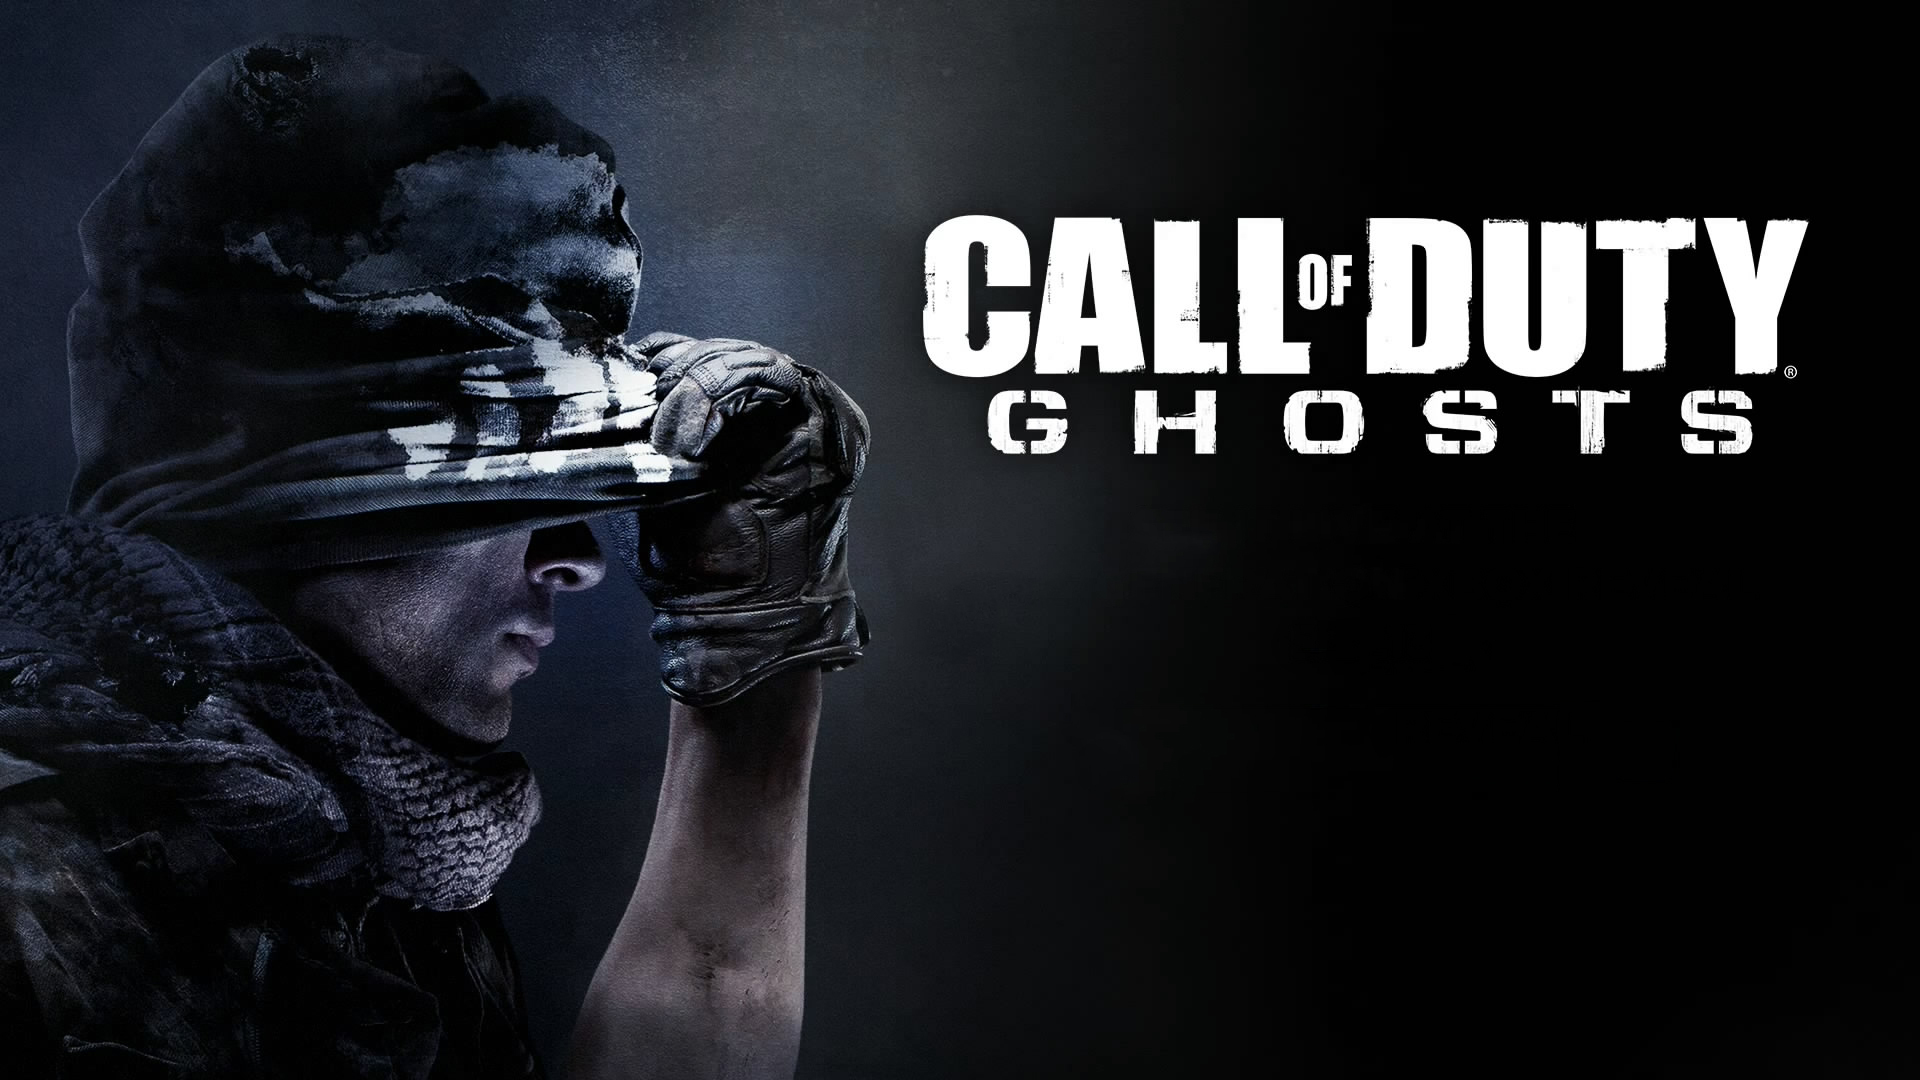 call of duty ghost character wallpaper